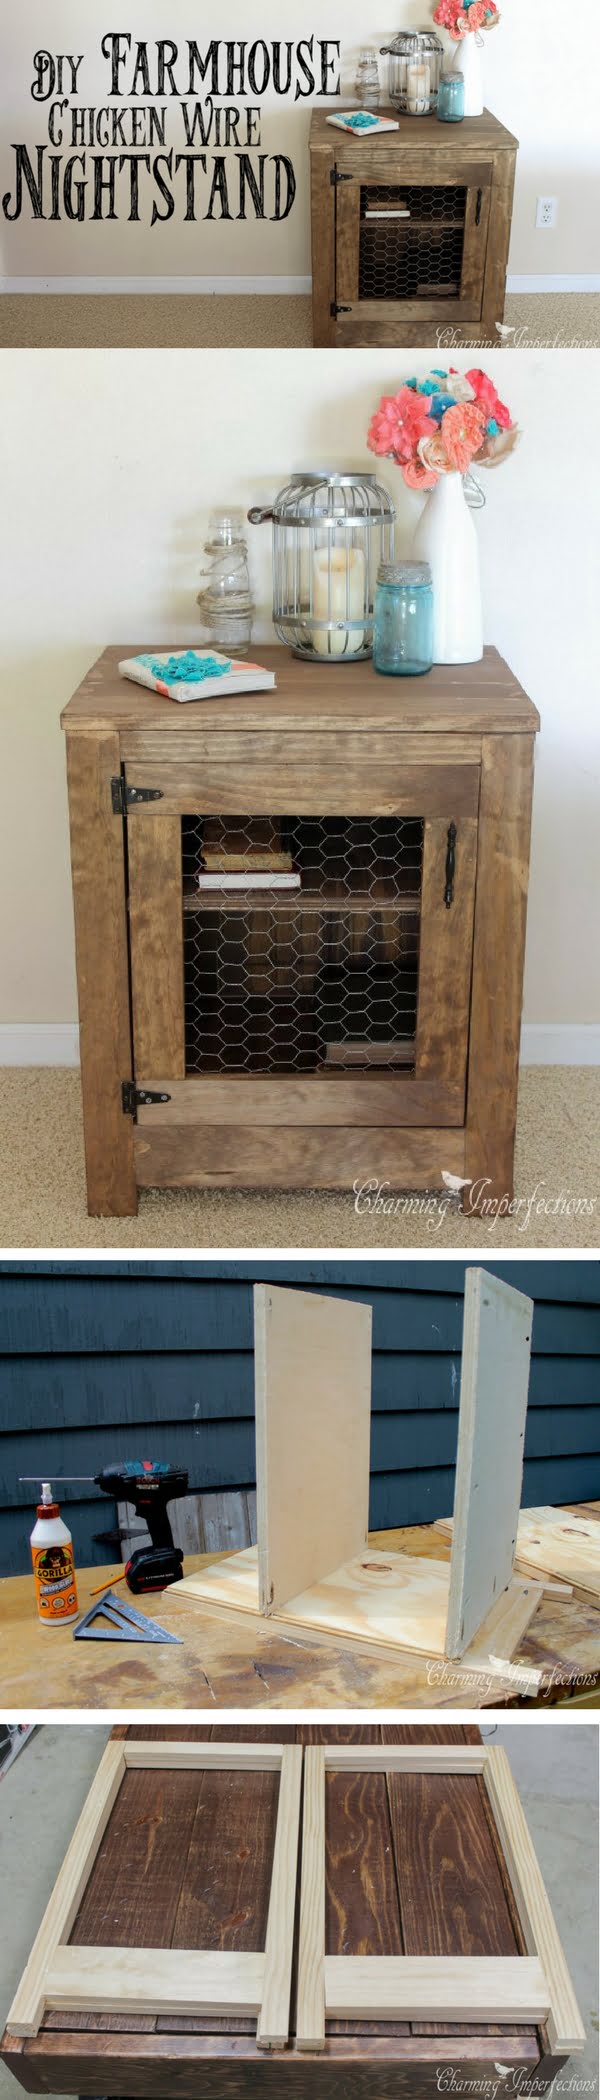 12 Easy DIY Nightstands That You Can Build on a Budget - Check out how to build this DIY farmhouse nightstand